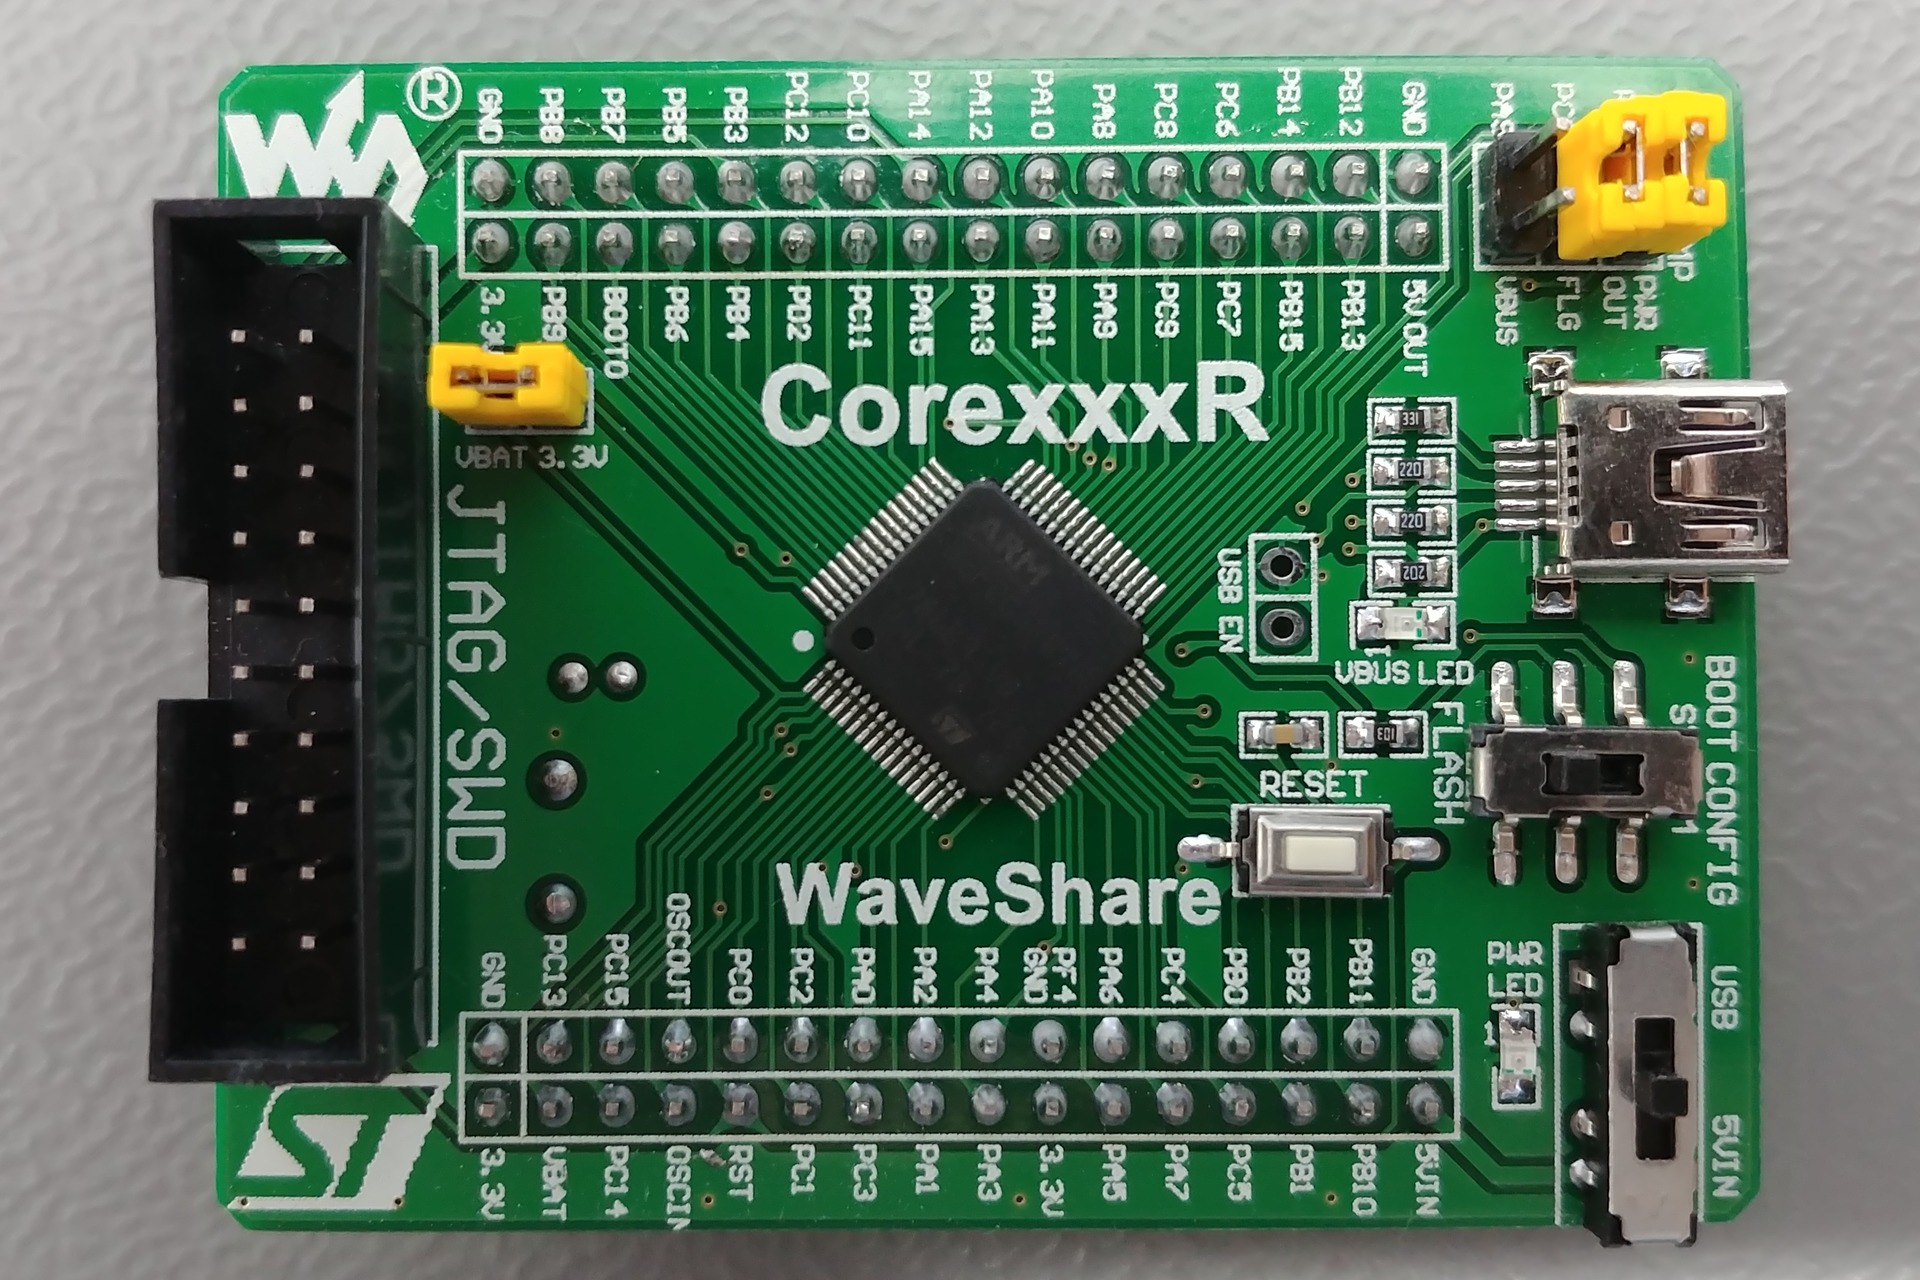 WaveShare Core205R board: Top view